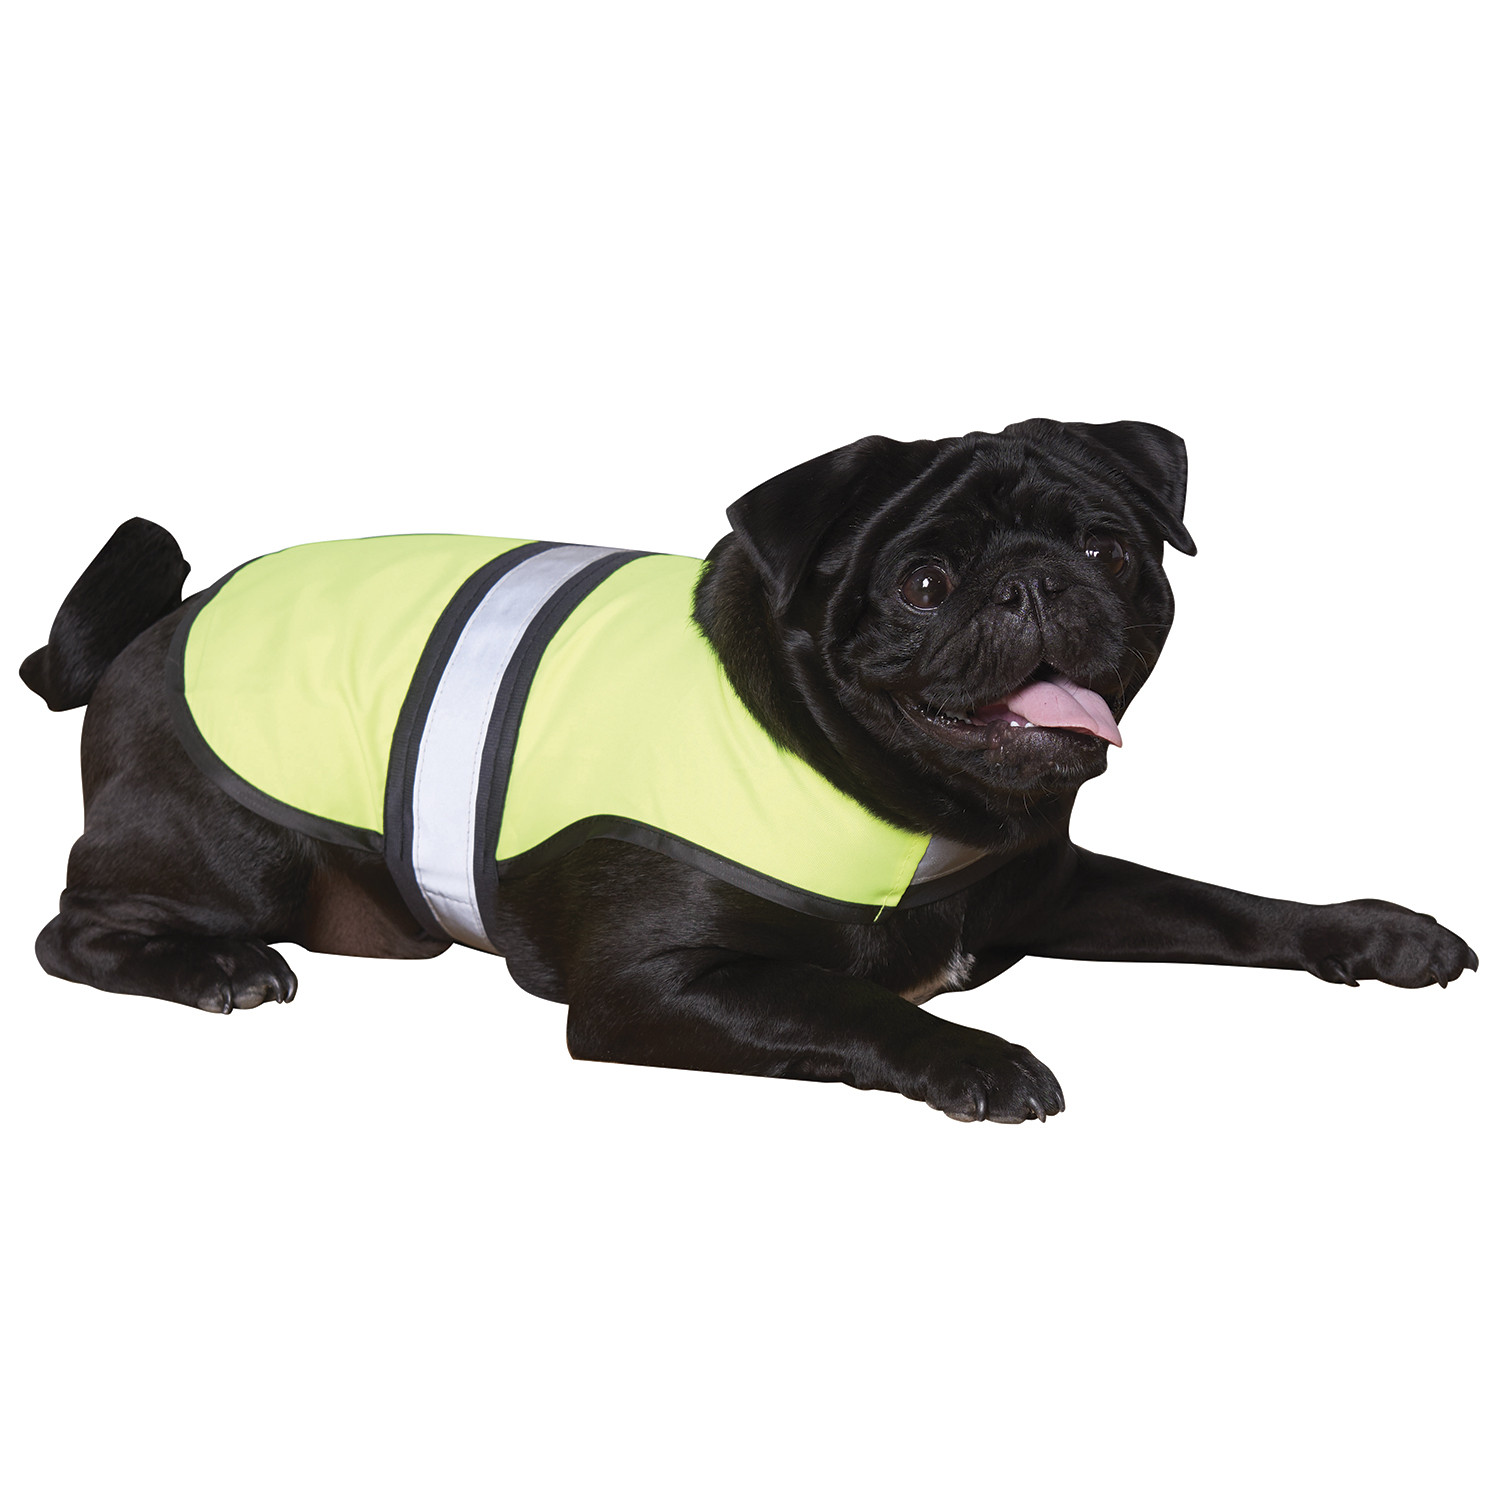 Lightweight High Visibility Gilet - XS Image 2